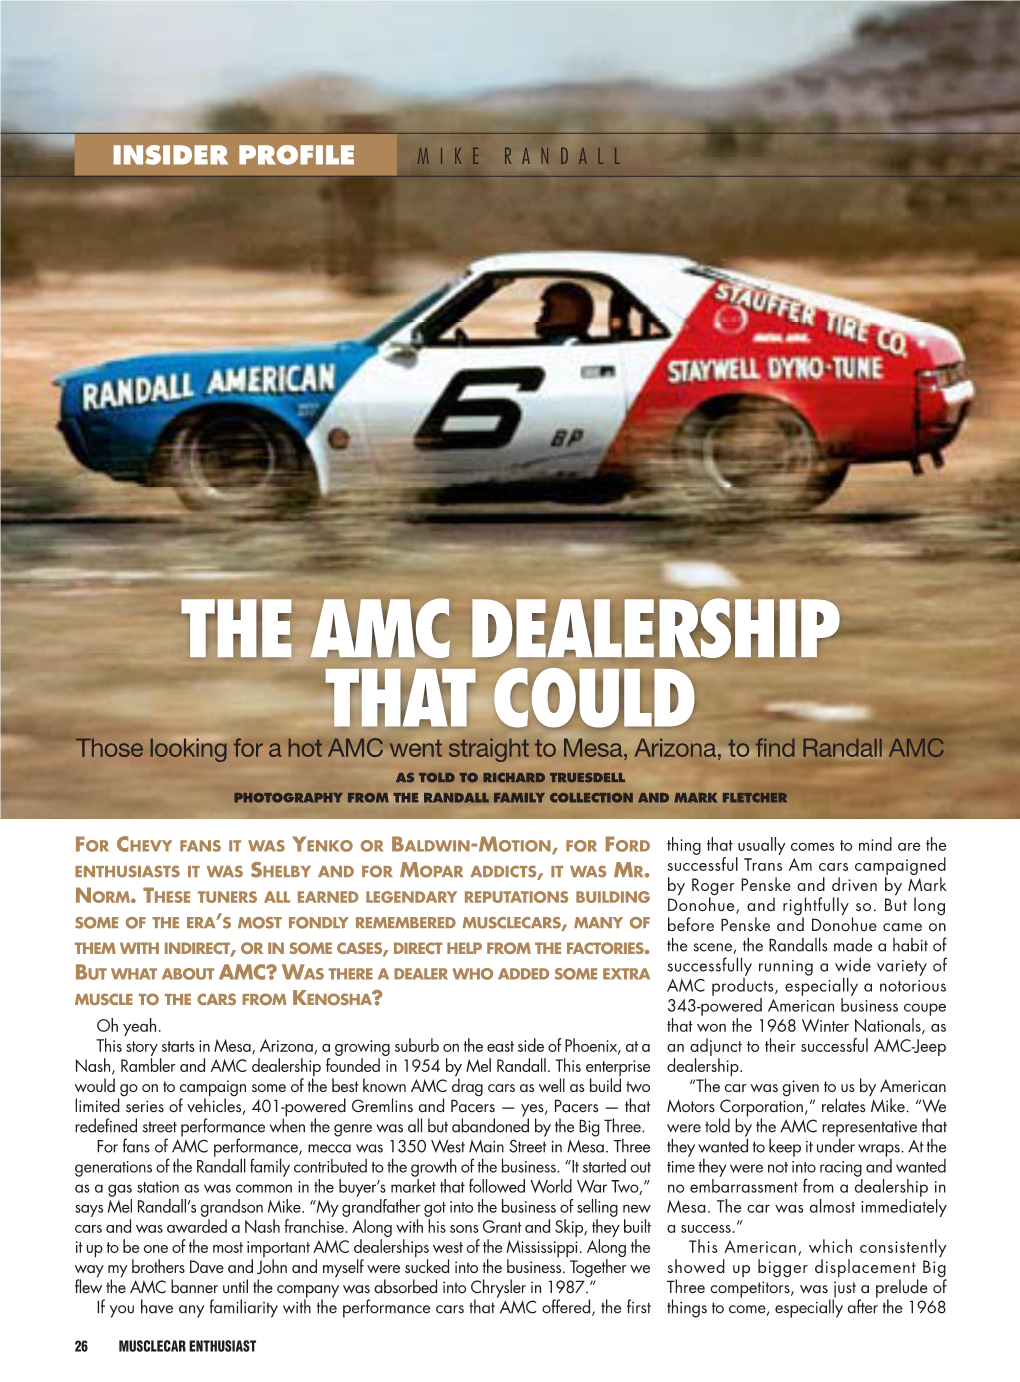 The AMC Dealership That Could